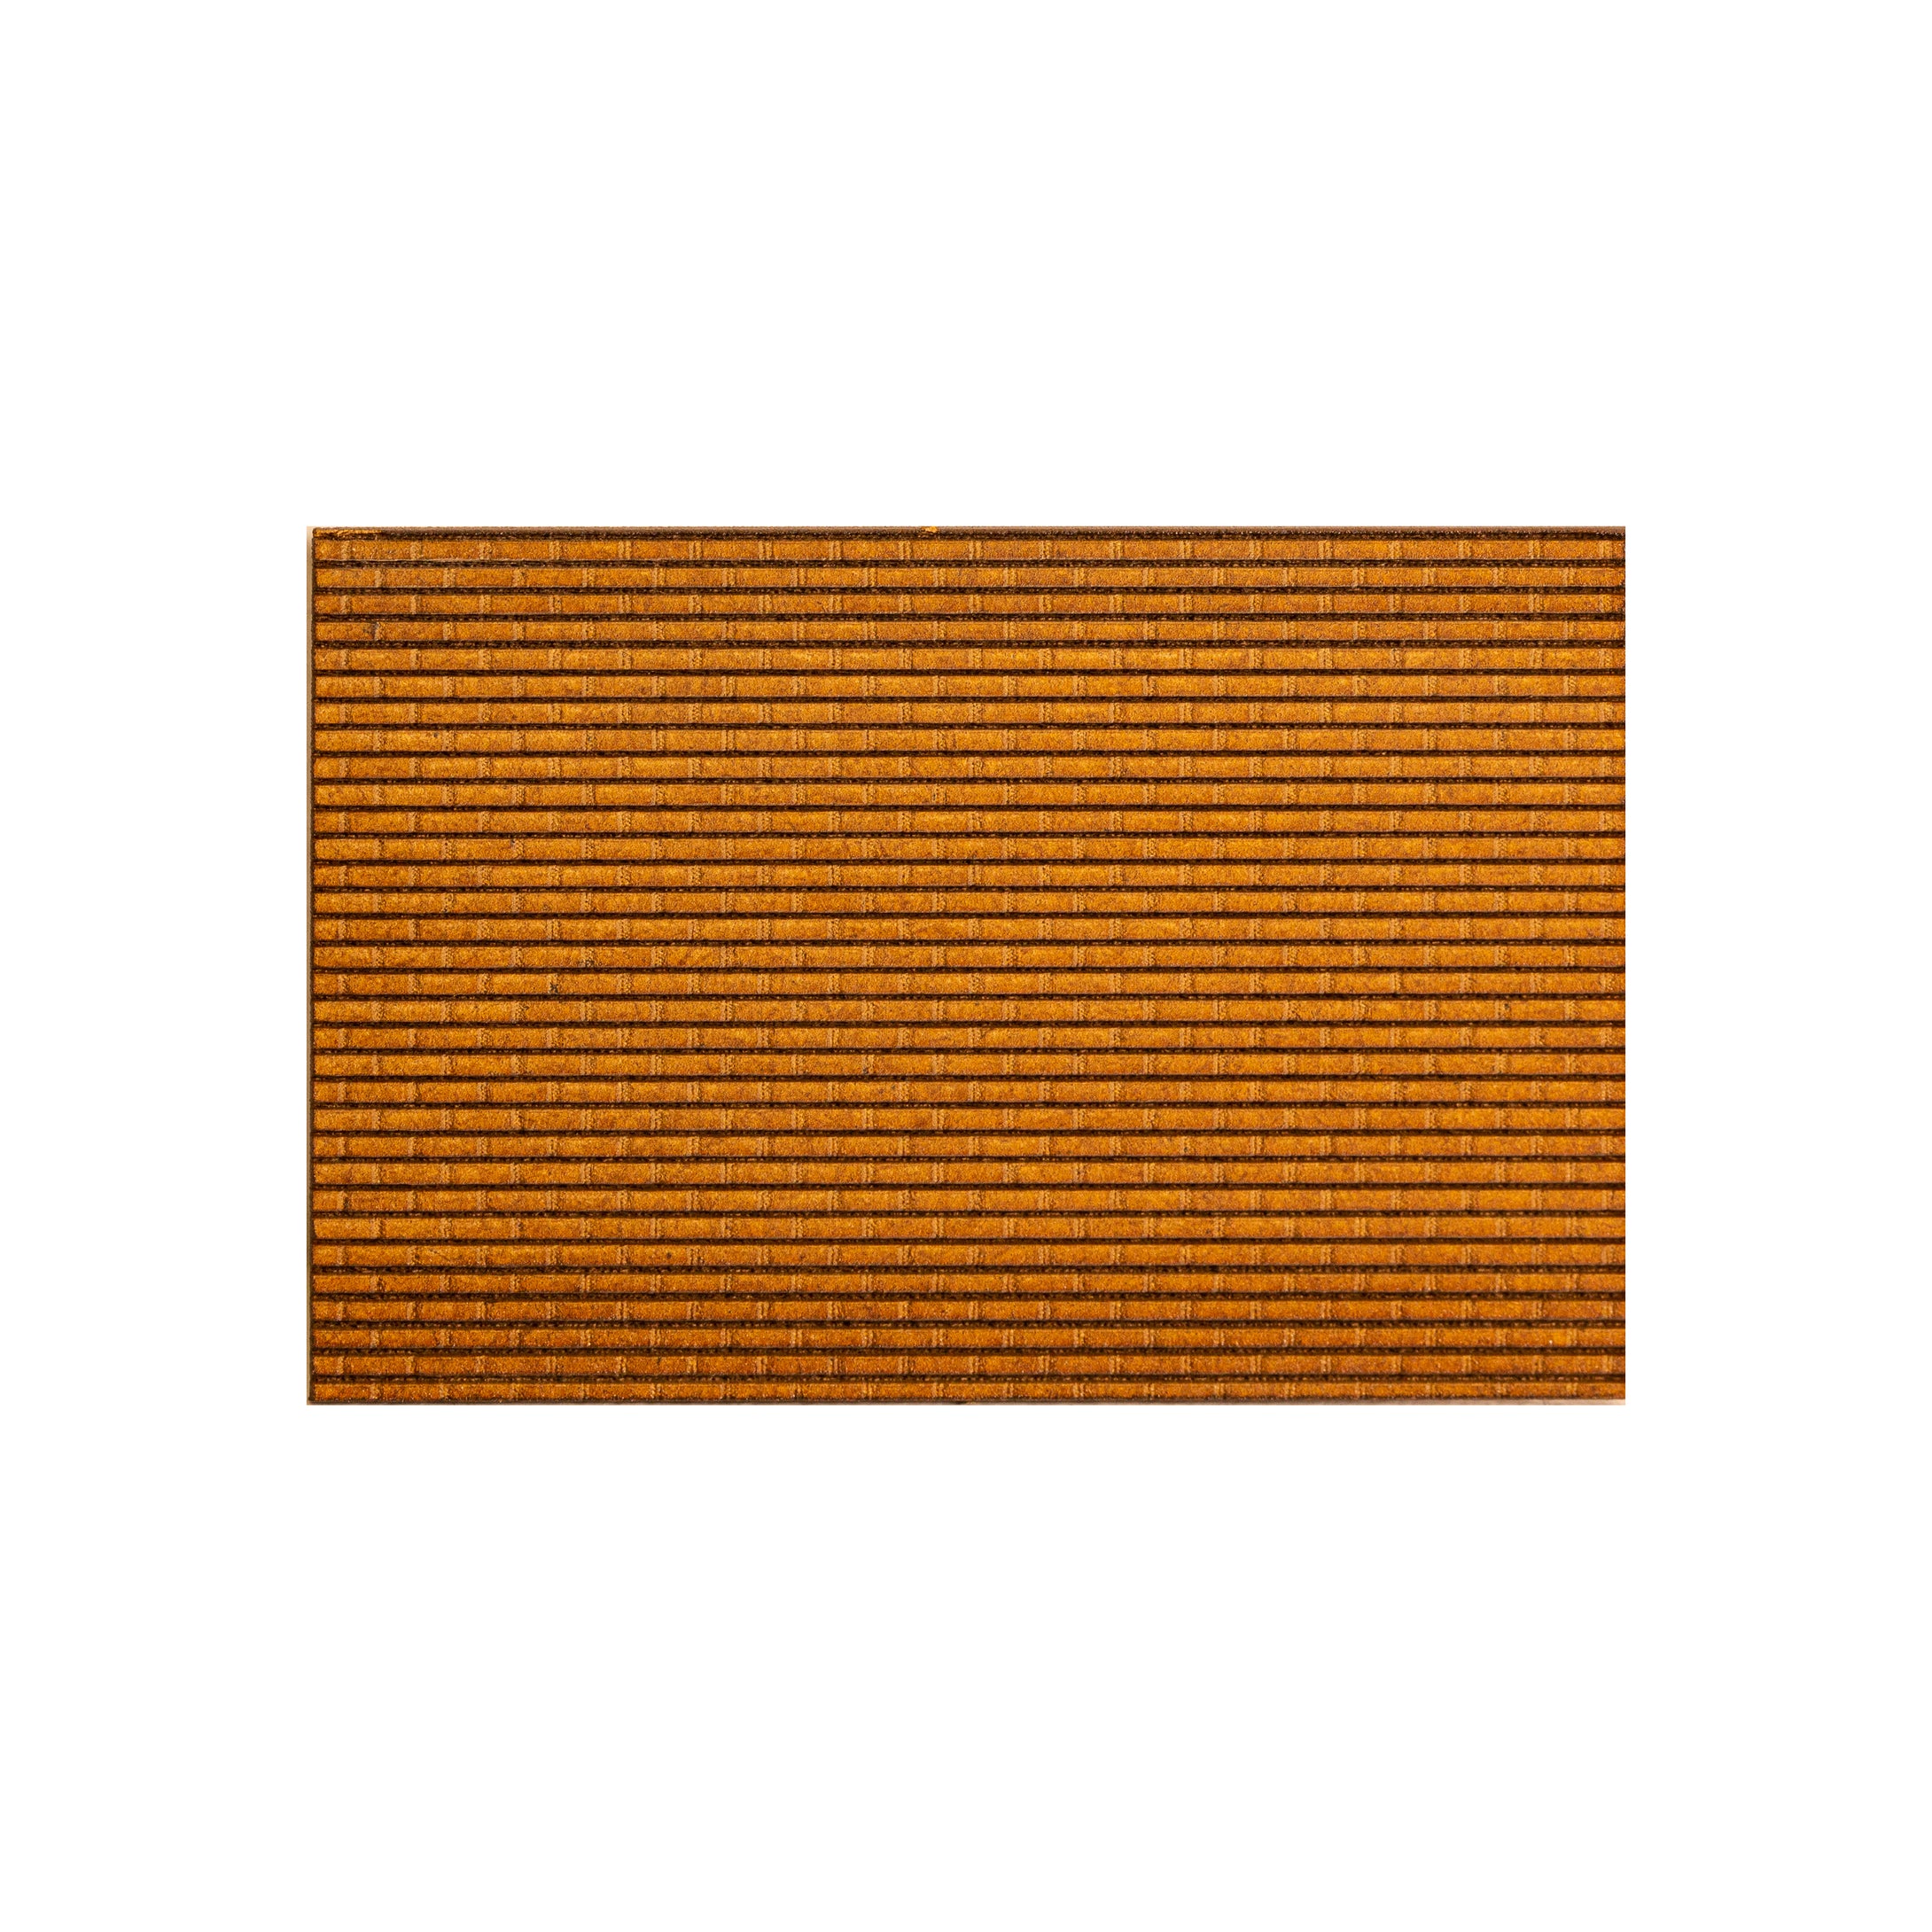 LP137 - HO Scale - Brick panel insert 0 openings - fits opening size A